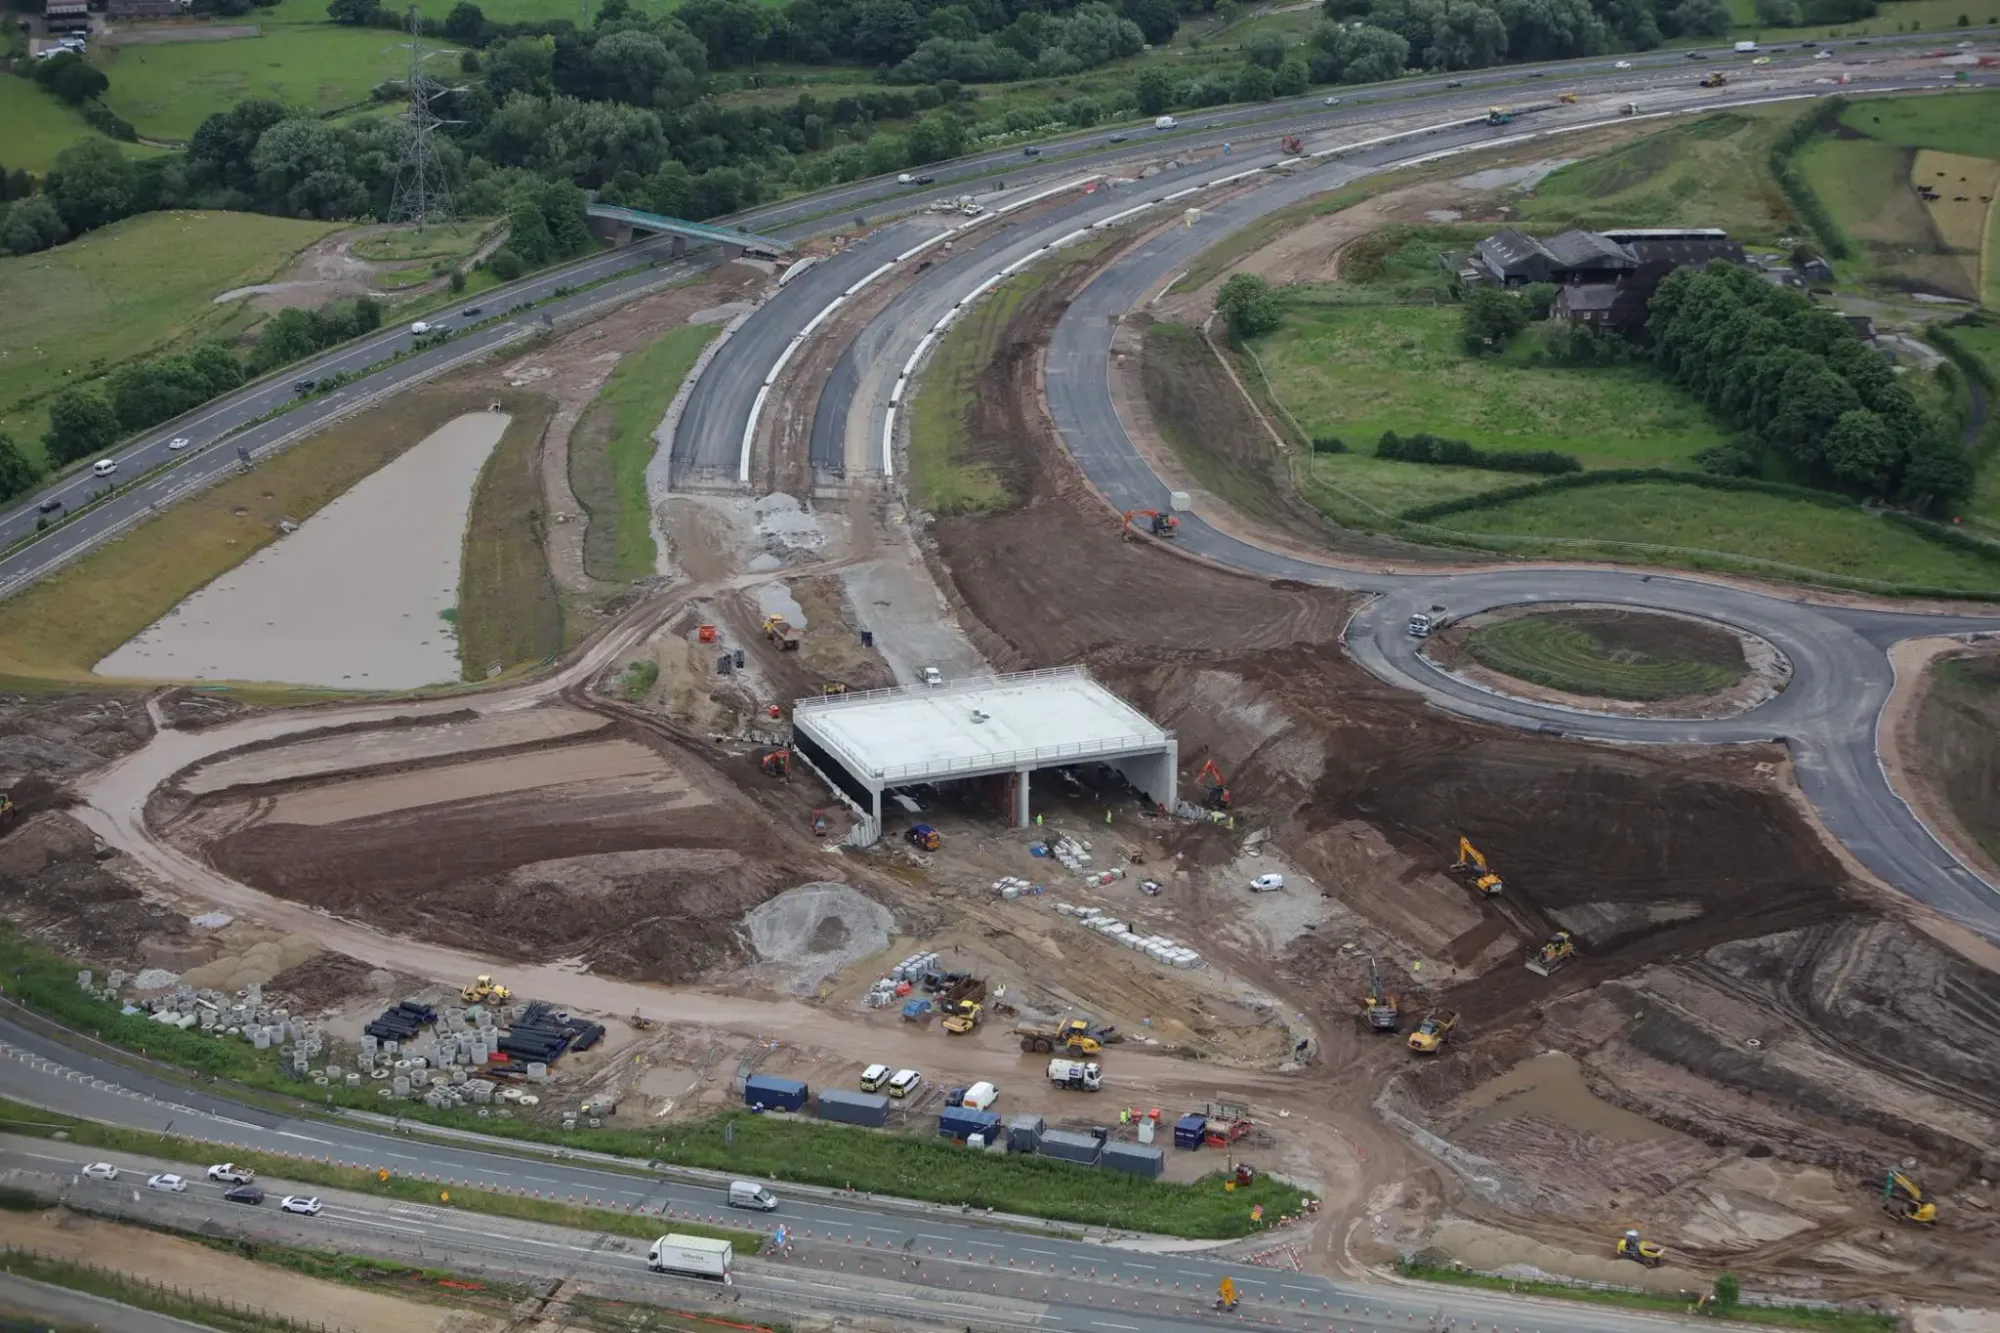 A bridge being built close to the Bowdon roundabout